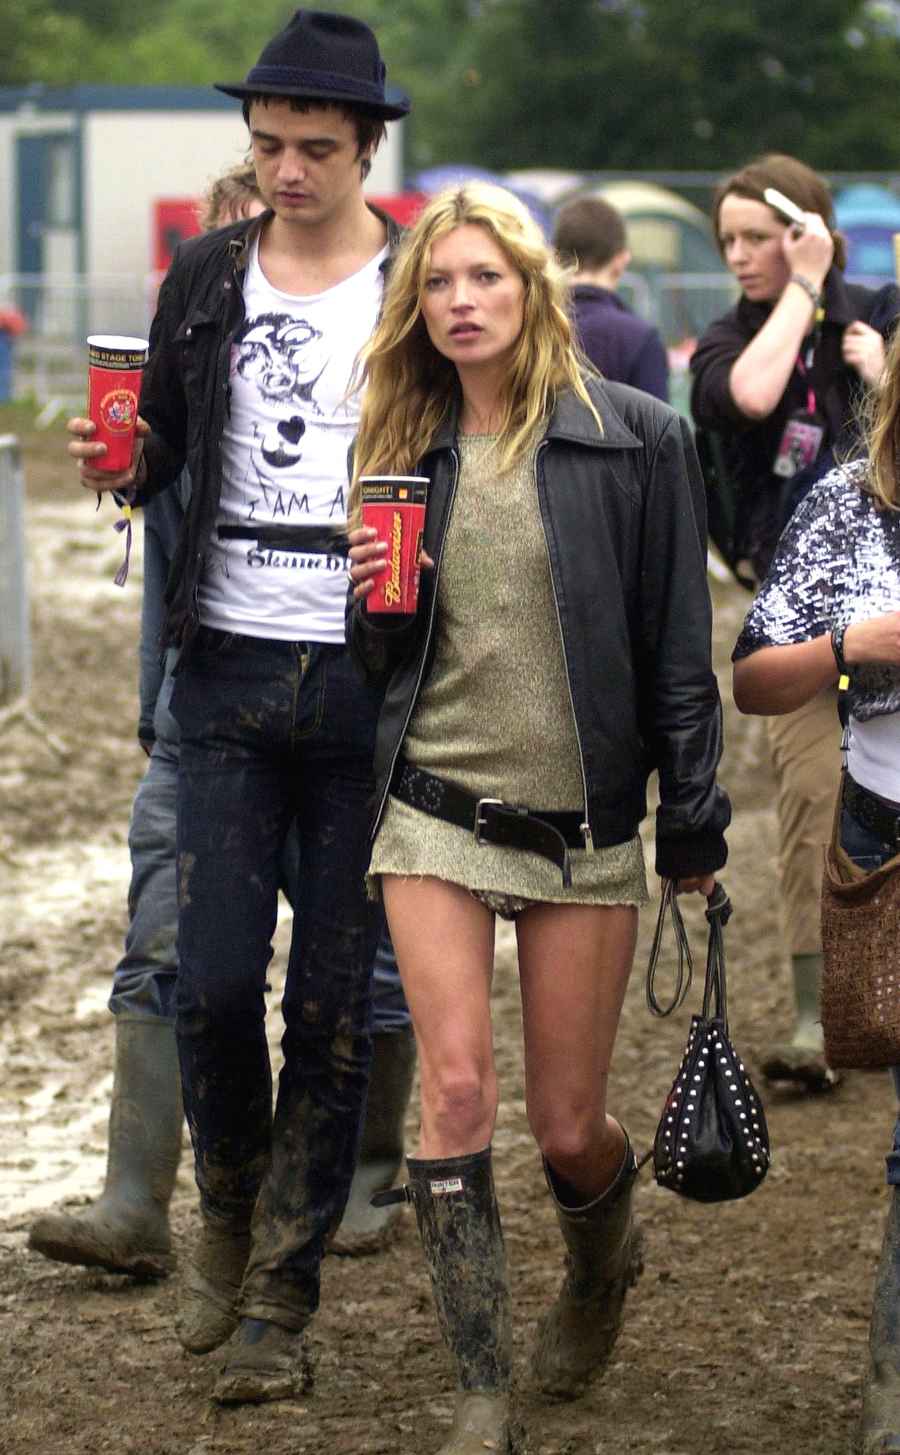 Kate Moss and Pete Doherty